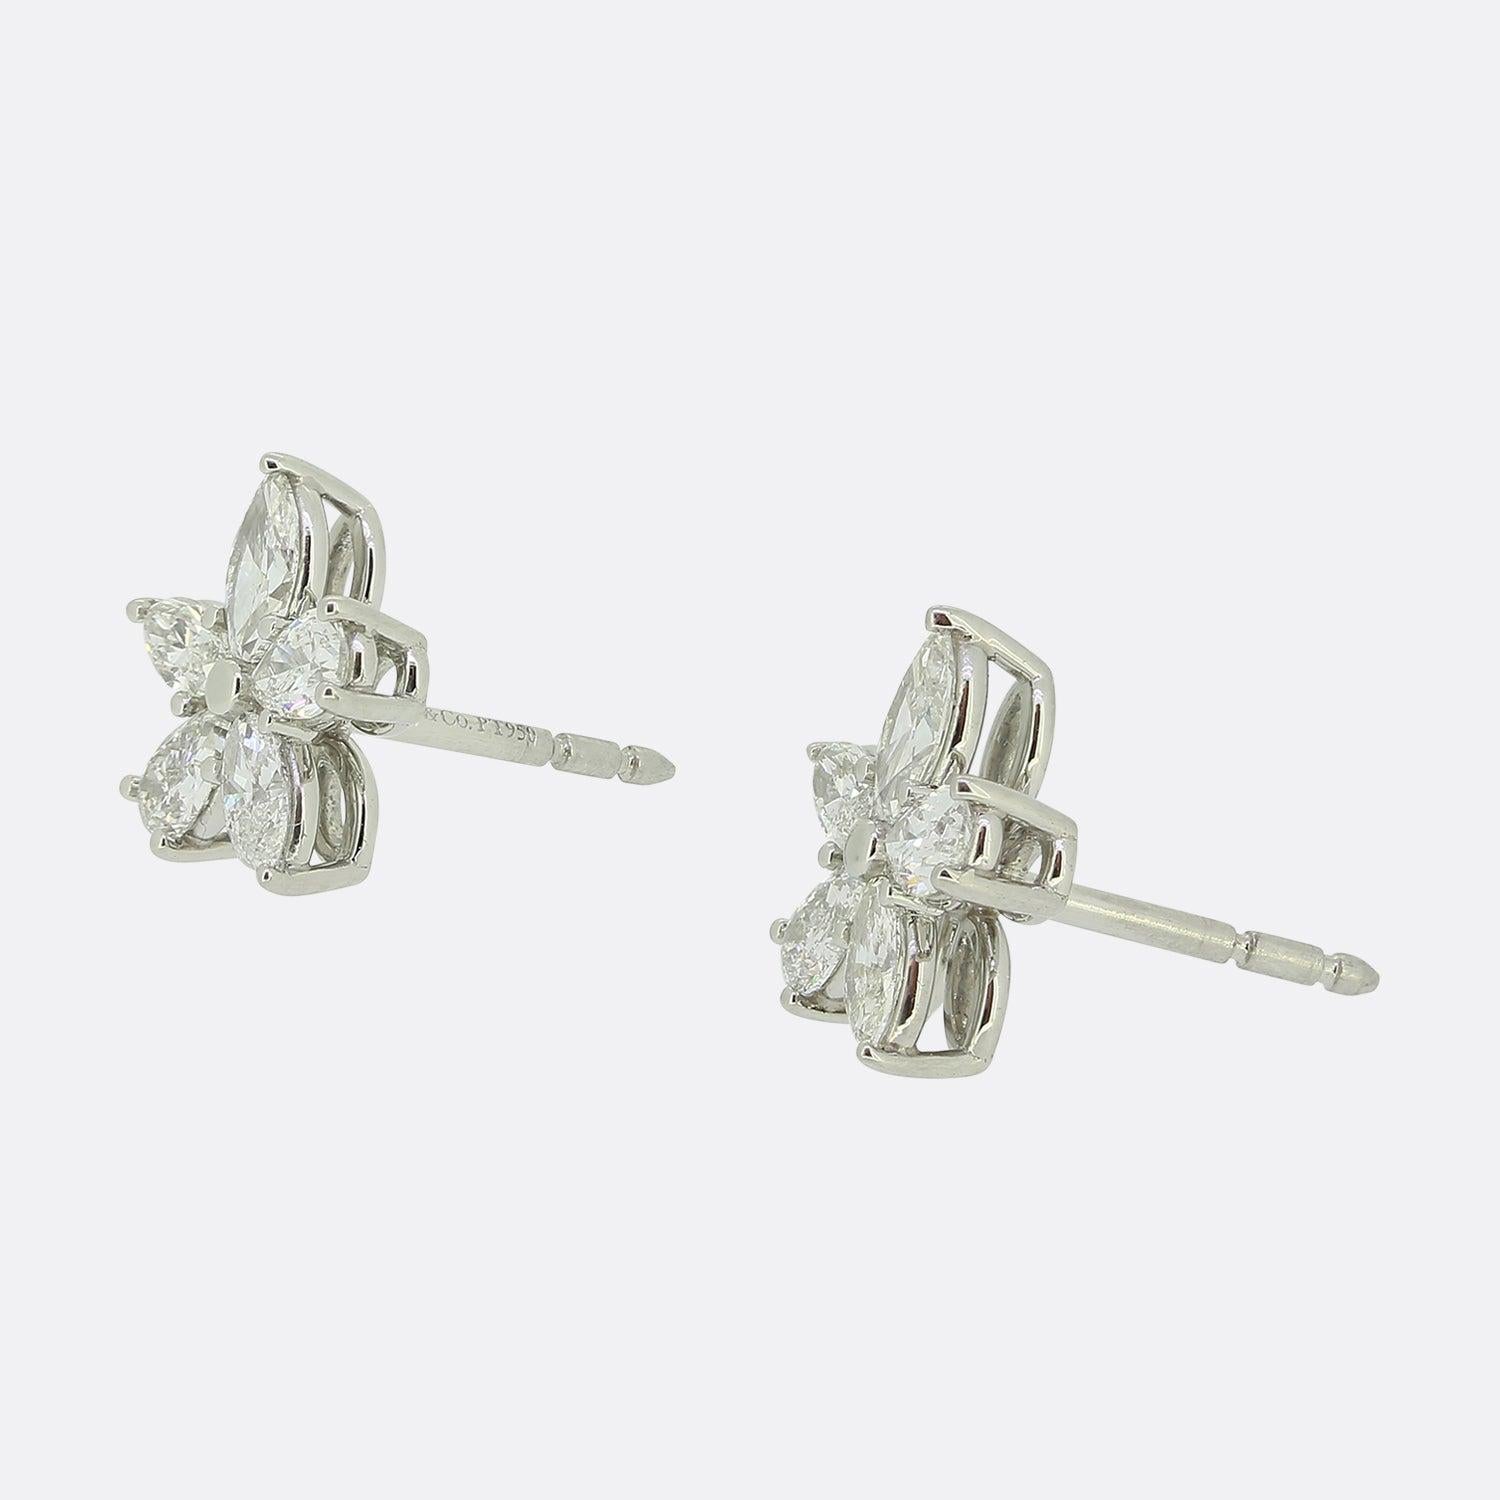 Here we have a stunning pair of diamond earrings from the world renowned luxury jewellery designer Tiffany & Co. These earrings form part of the Victoria collection and showcase a duo of marquise cut diamonds and a trio of pear shaped diamonds; each